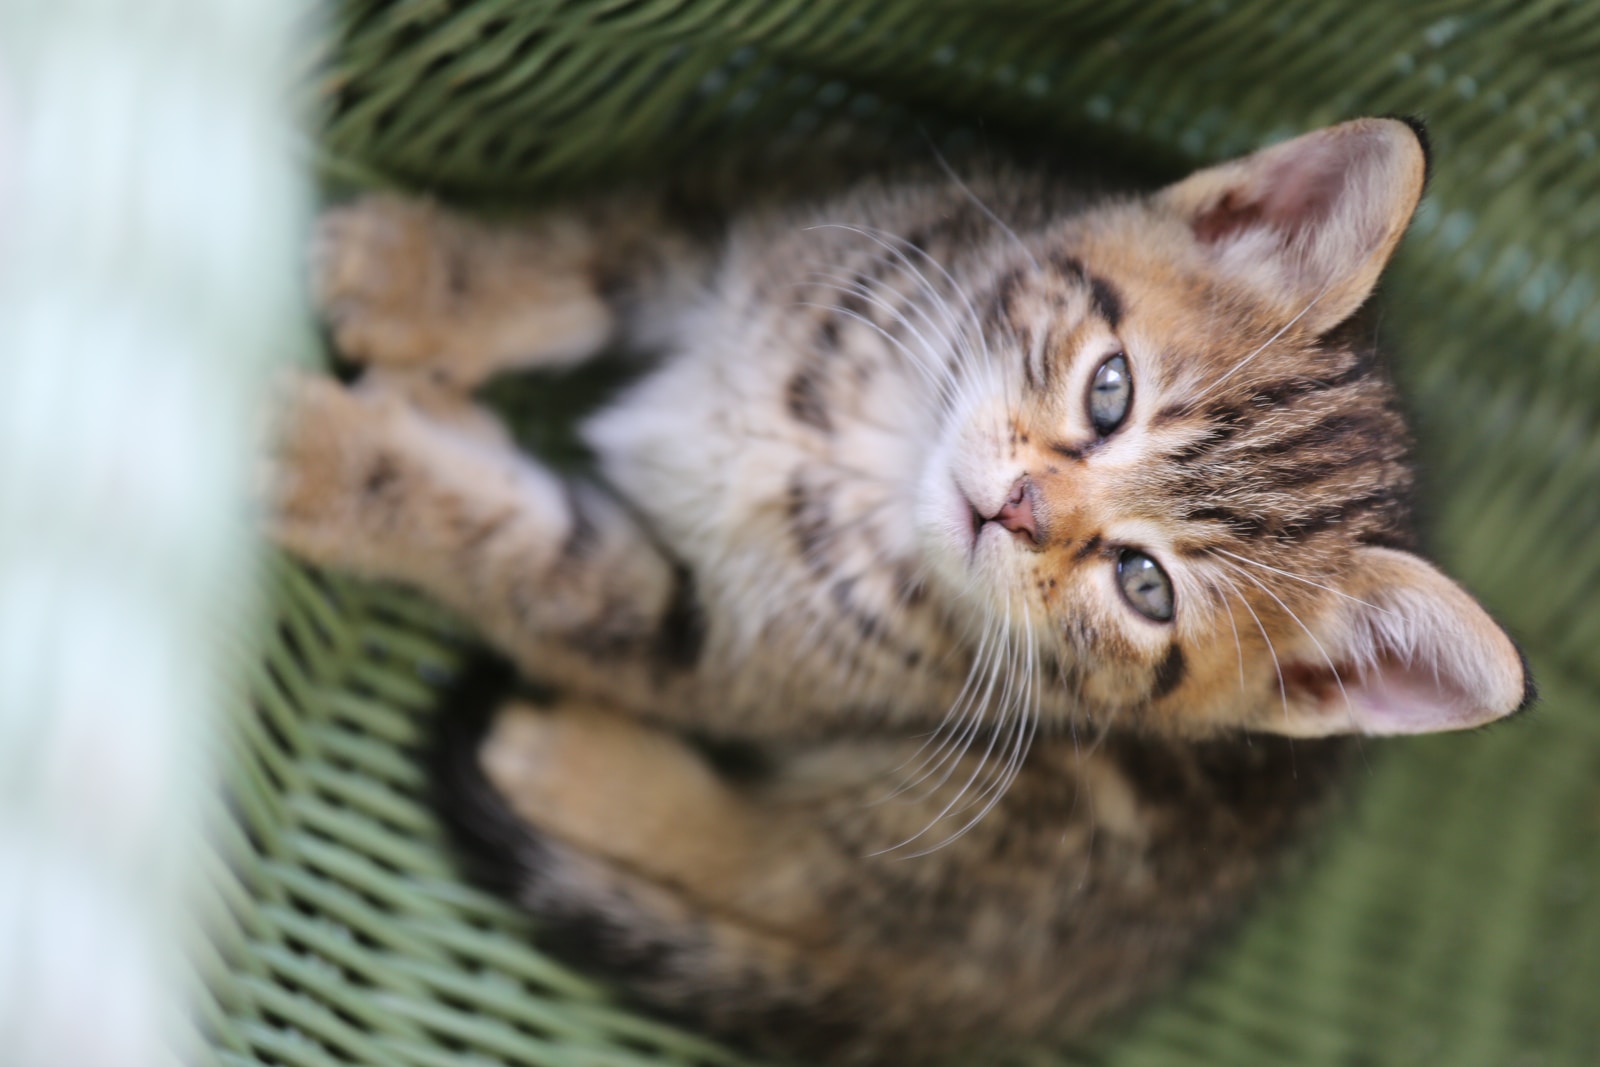 brown tabby cat lying on green textile